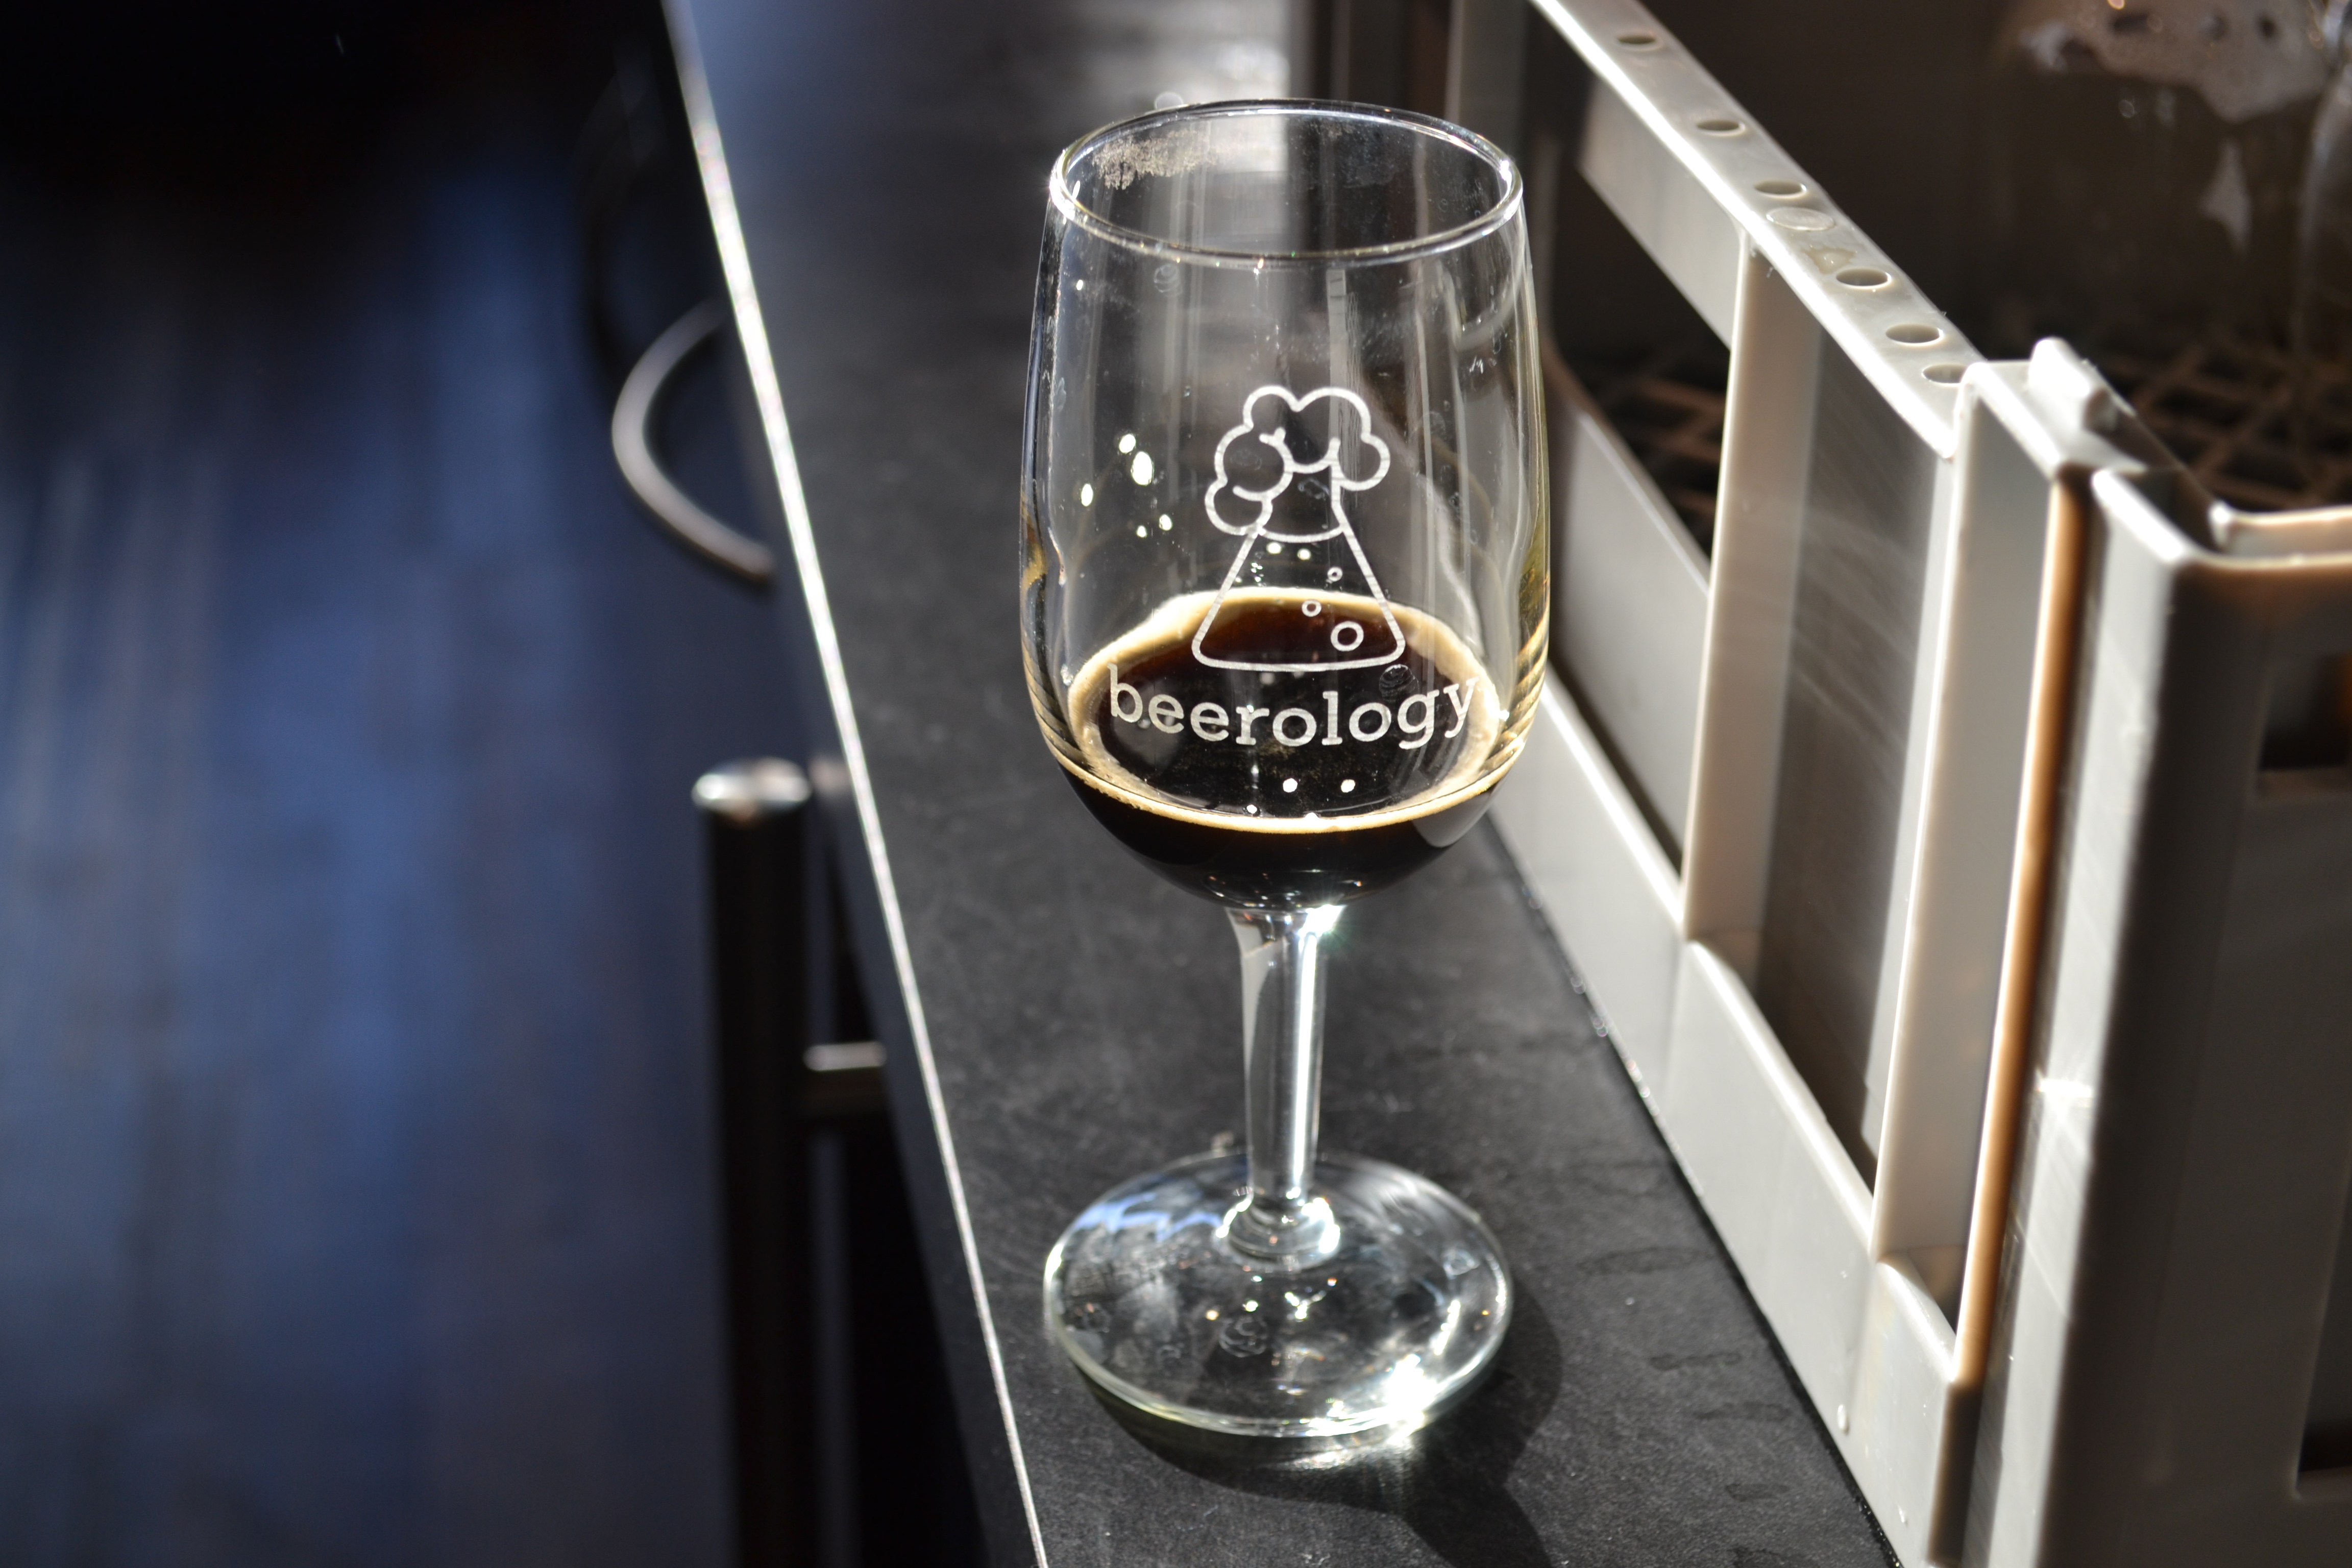 At Beerology, Homebrewers Can Go Local, Too